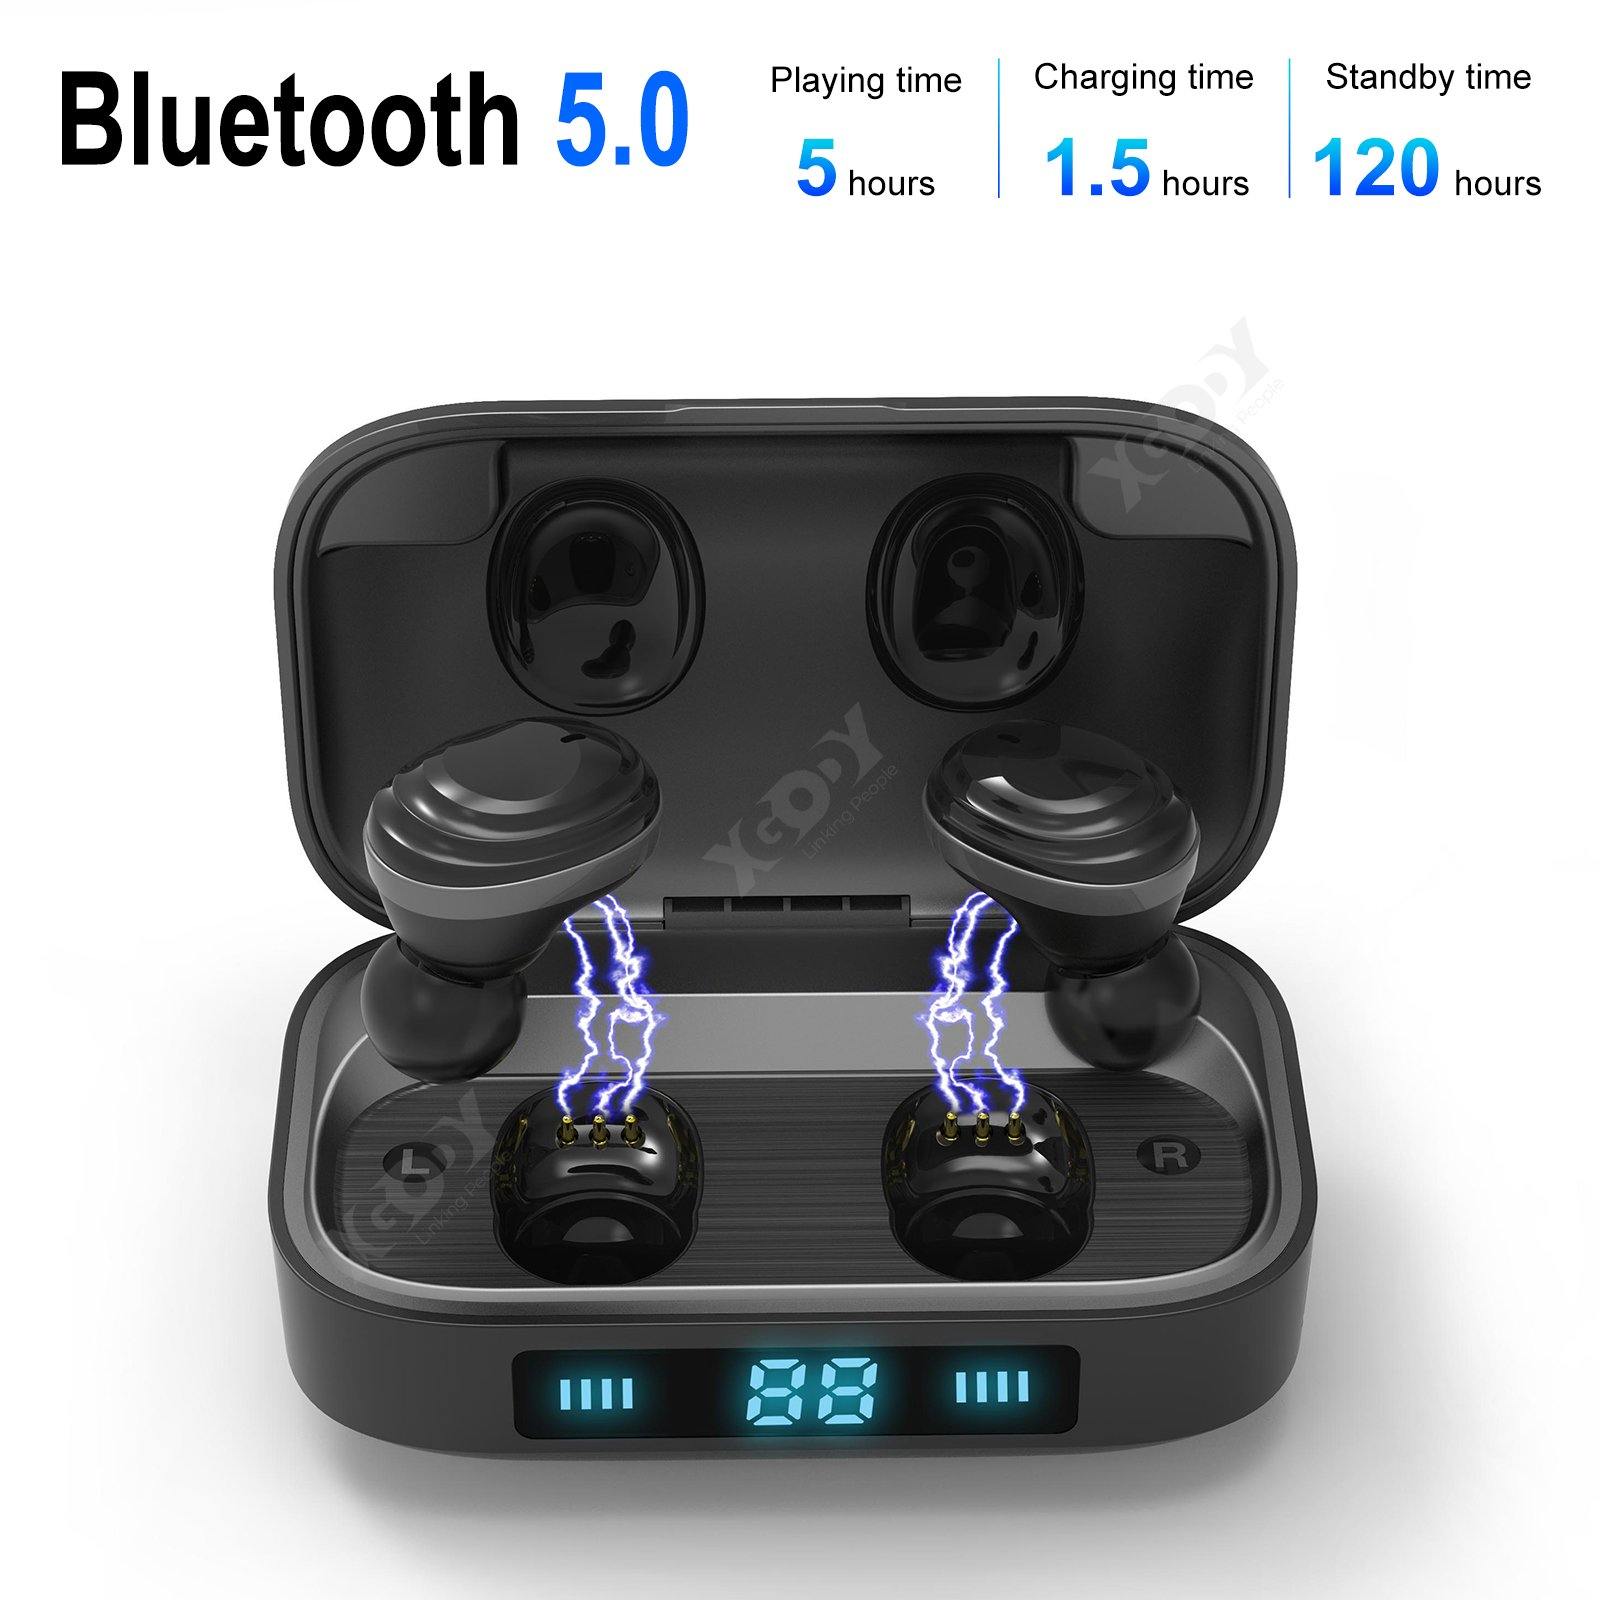 Cost-effective and Most worthwhile XGODY H01 bluetooth 5.0 waterproof earbuds - American customized version - XGODY 